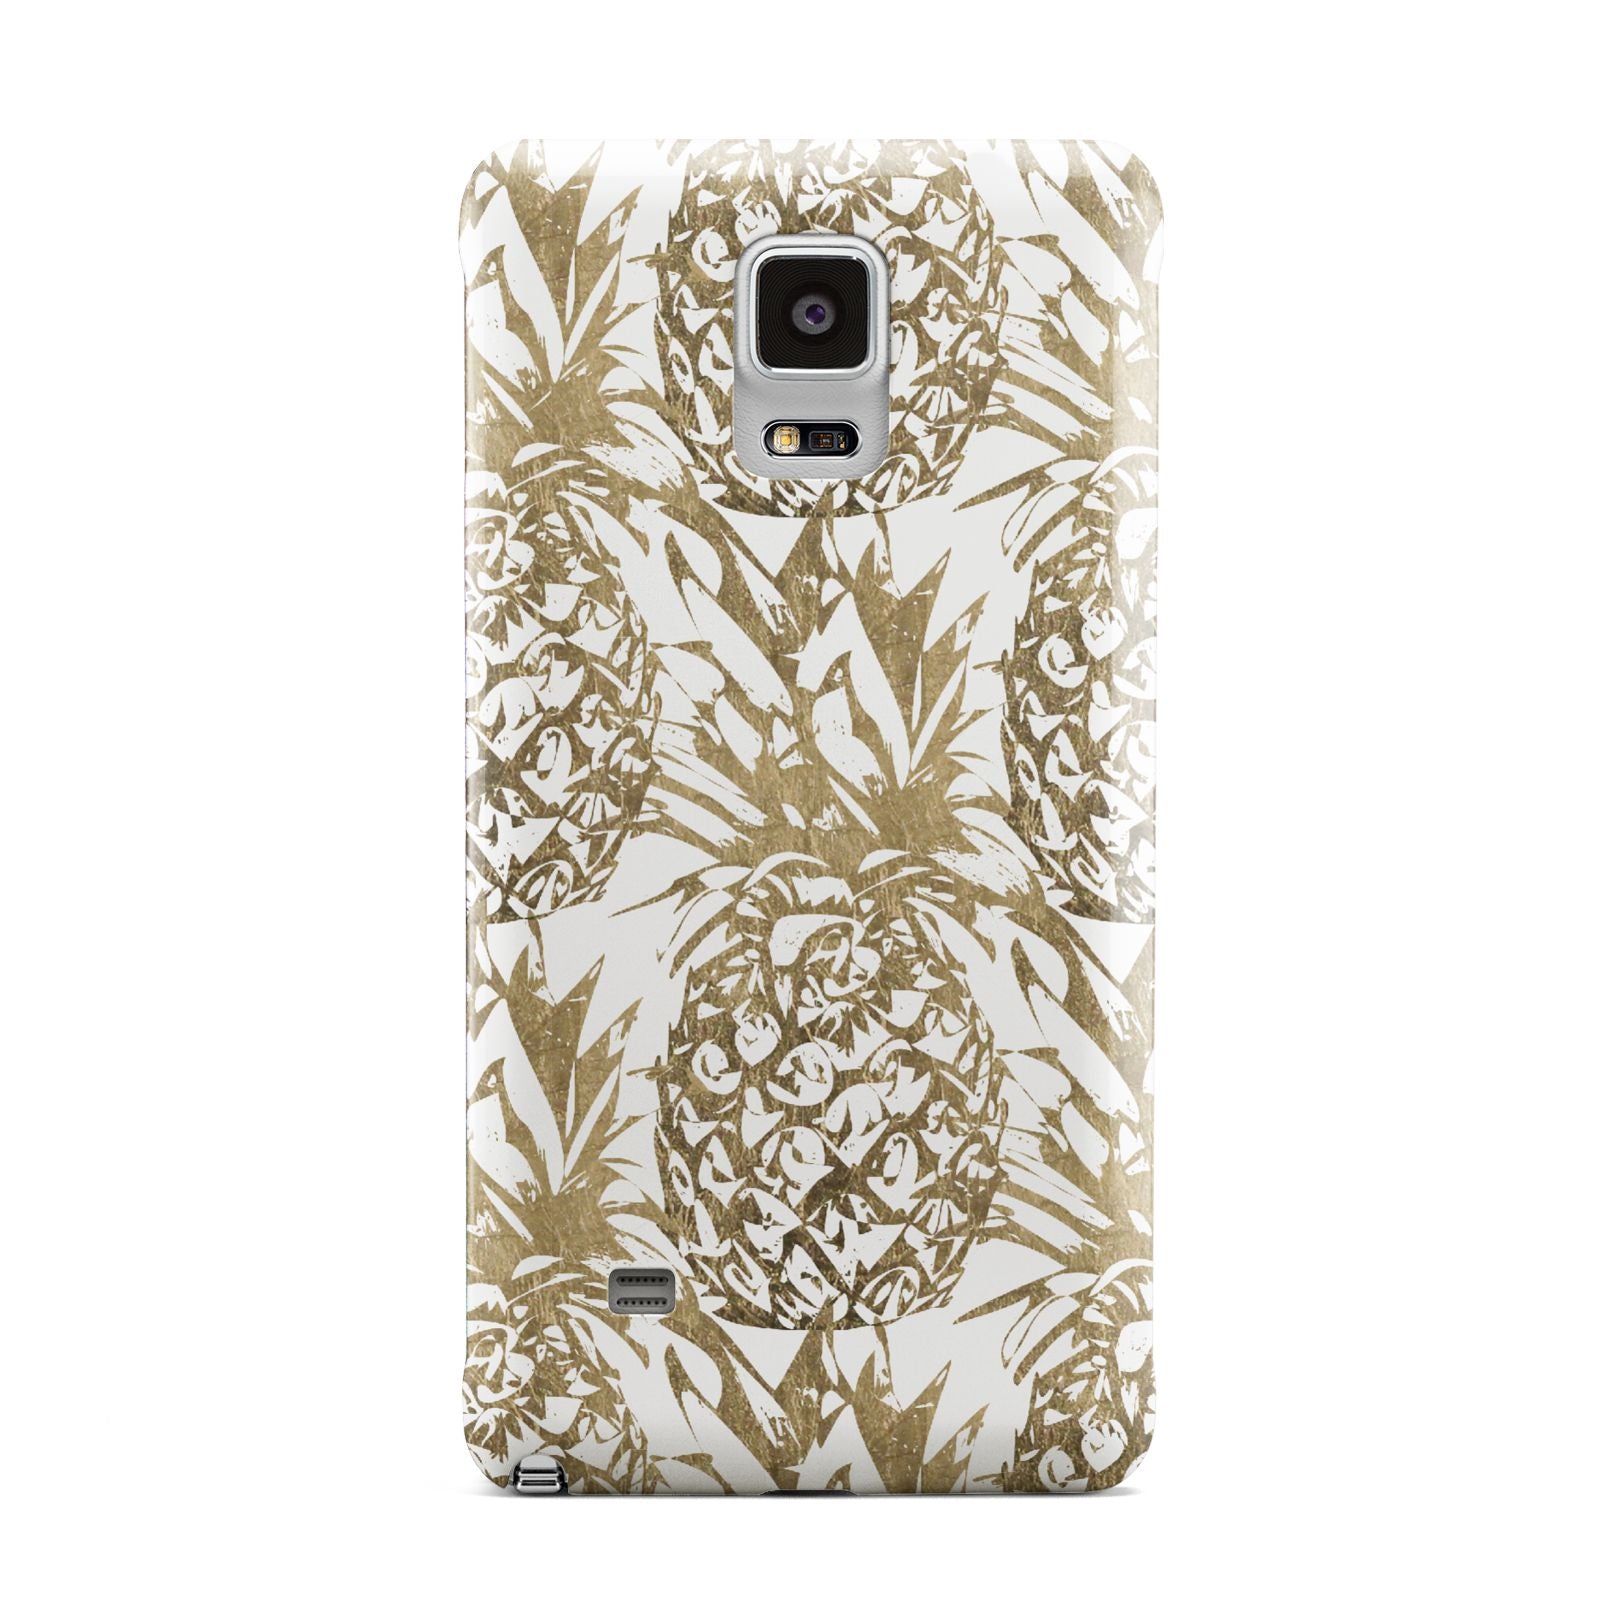 Gold Pineapple Fruit Samsung Galaxy Note 4 Case